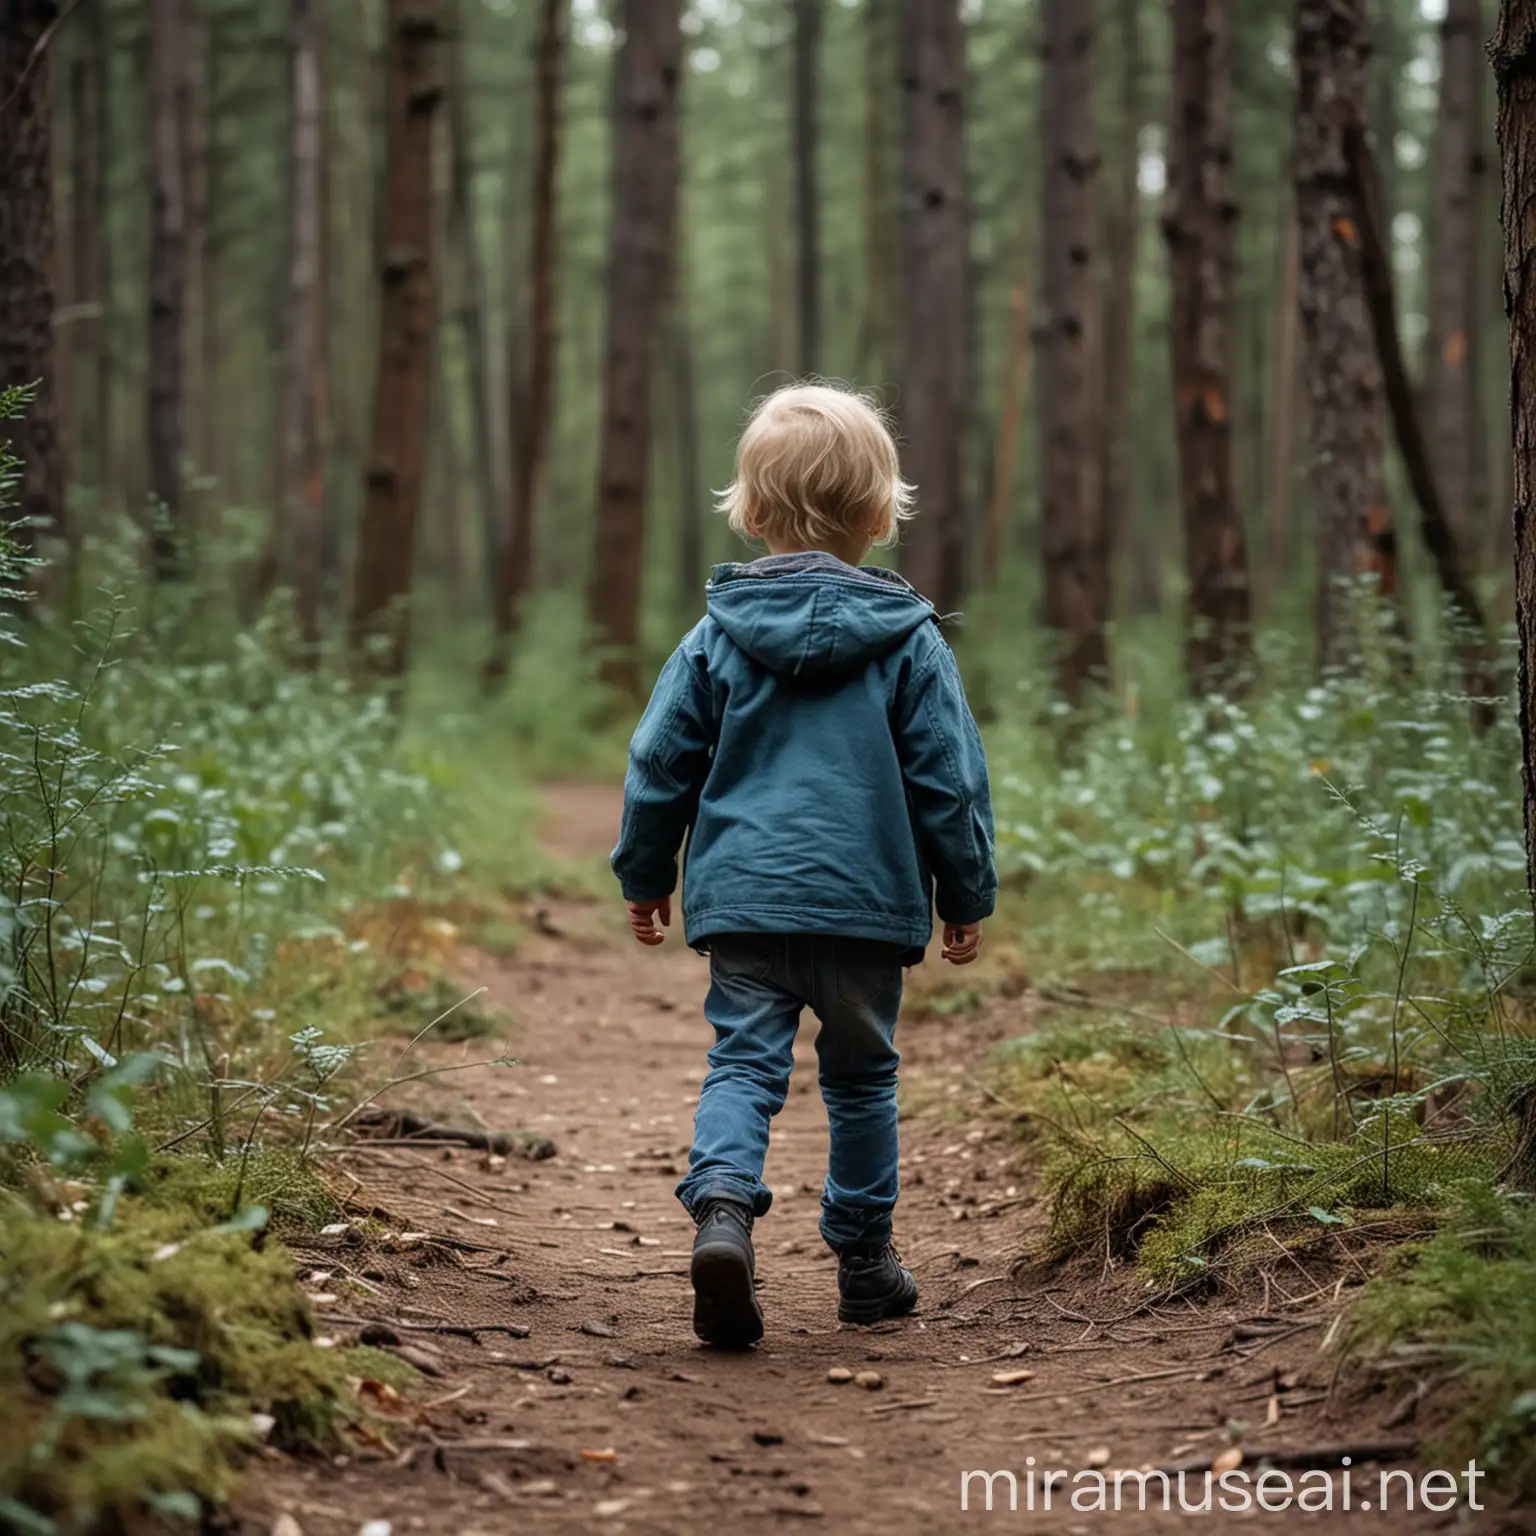 a small child walks in the forest